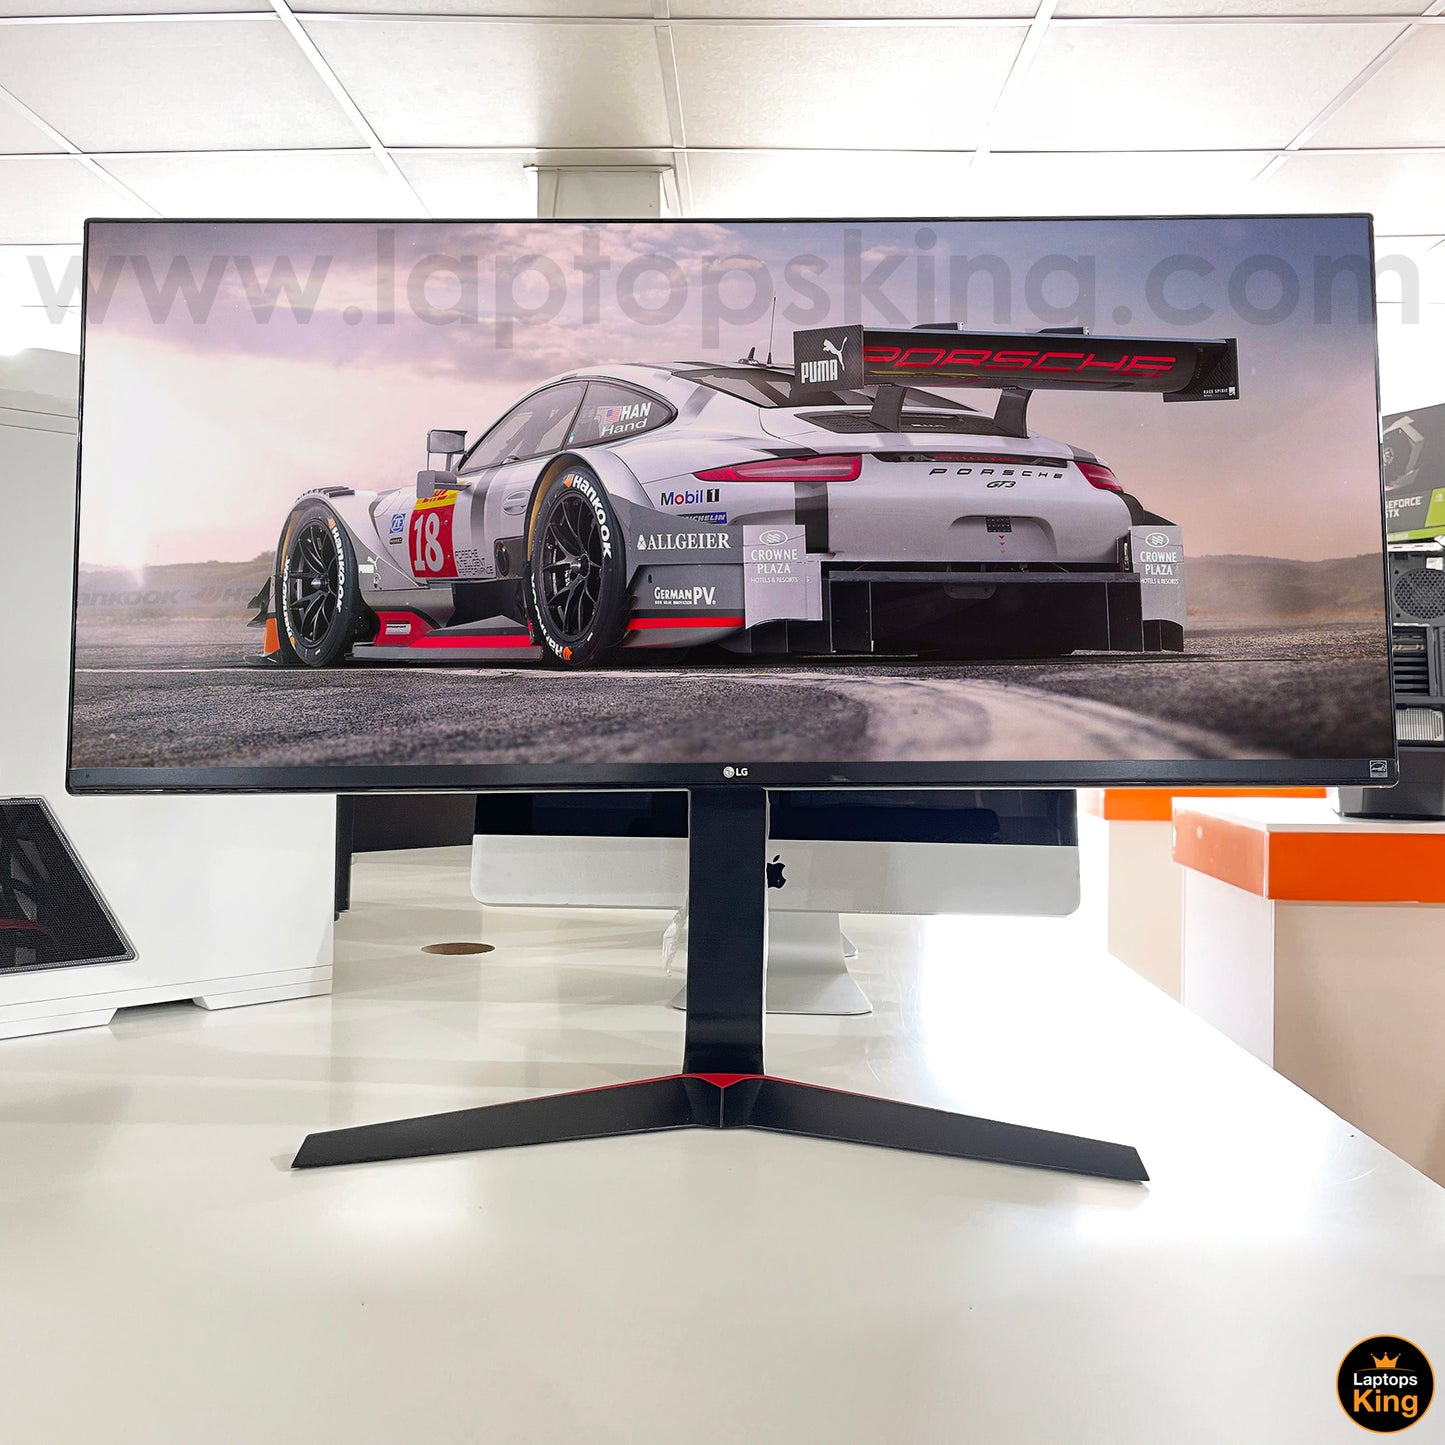 LG 34UM69G-B 34" IPS 2560*1080 1MS MBR Ultra-Wide Gaming Monitor (Used Just Like New)